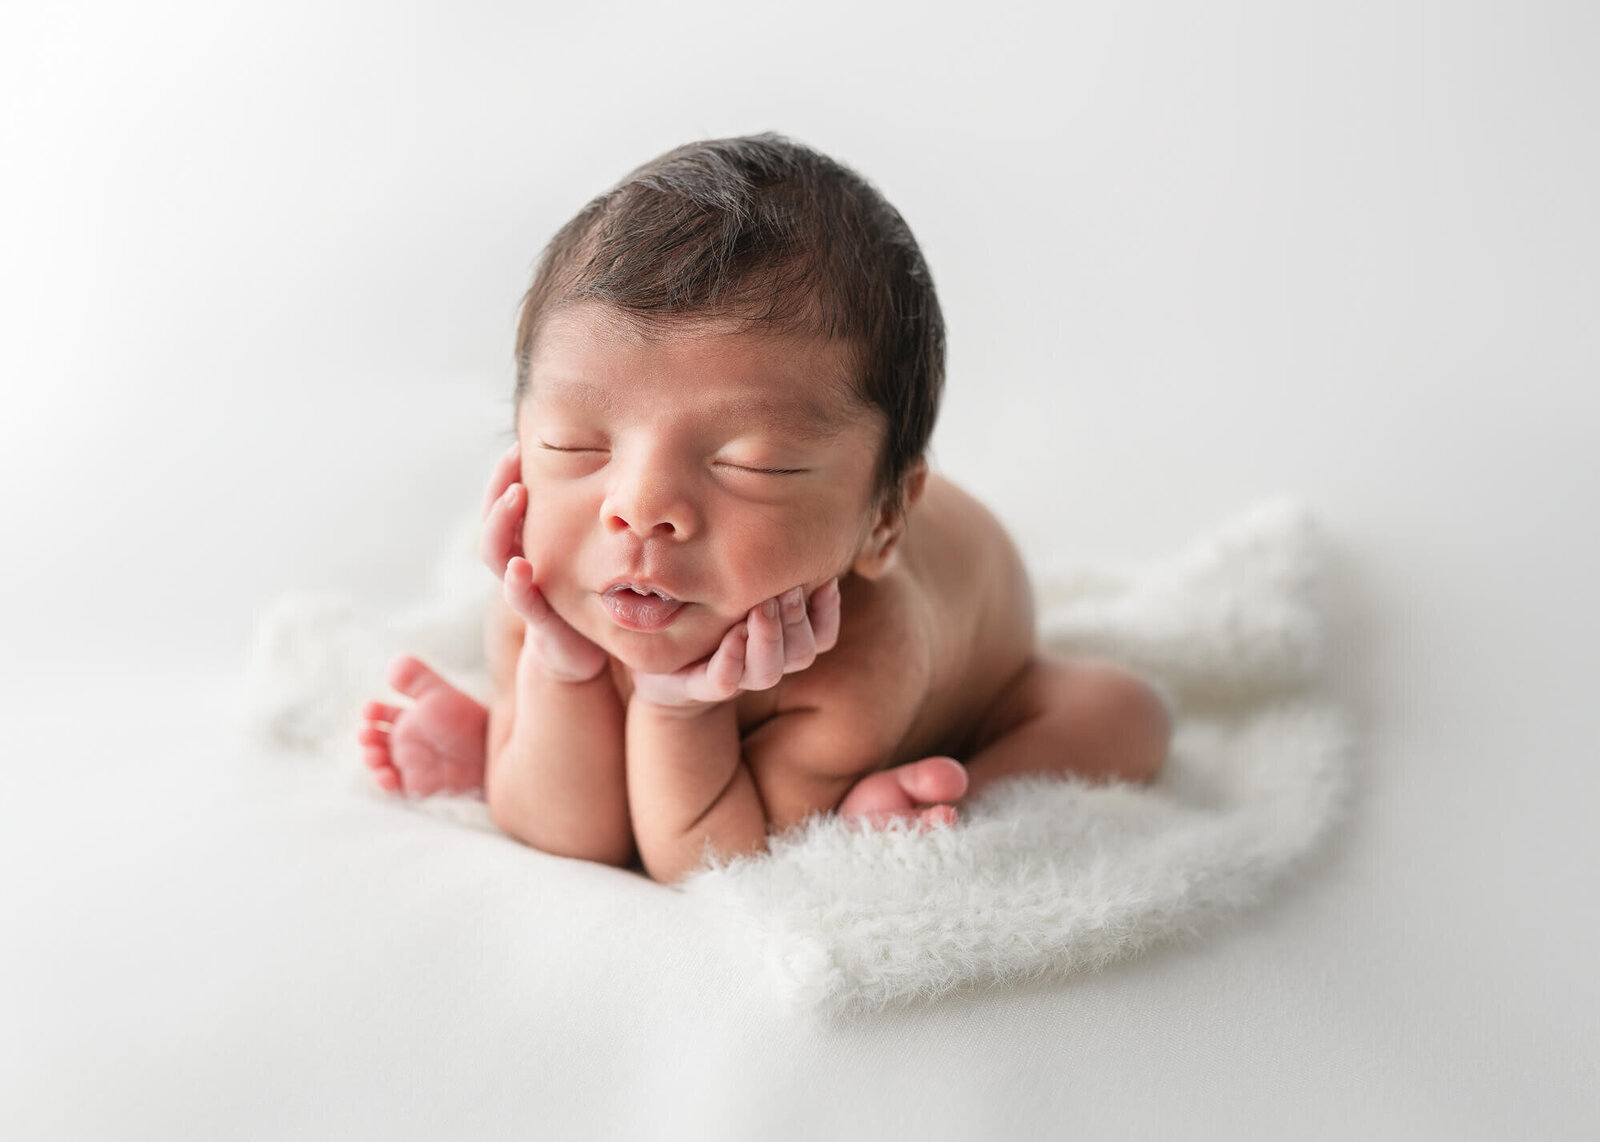 Newborn picture in froggy pose